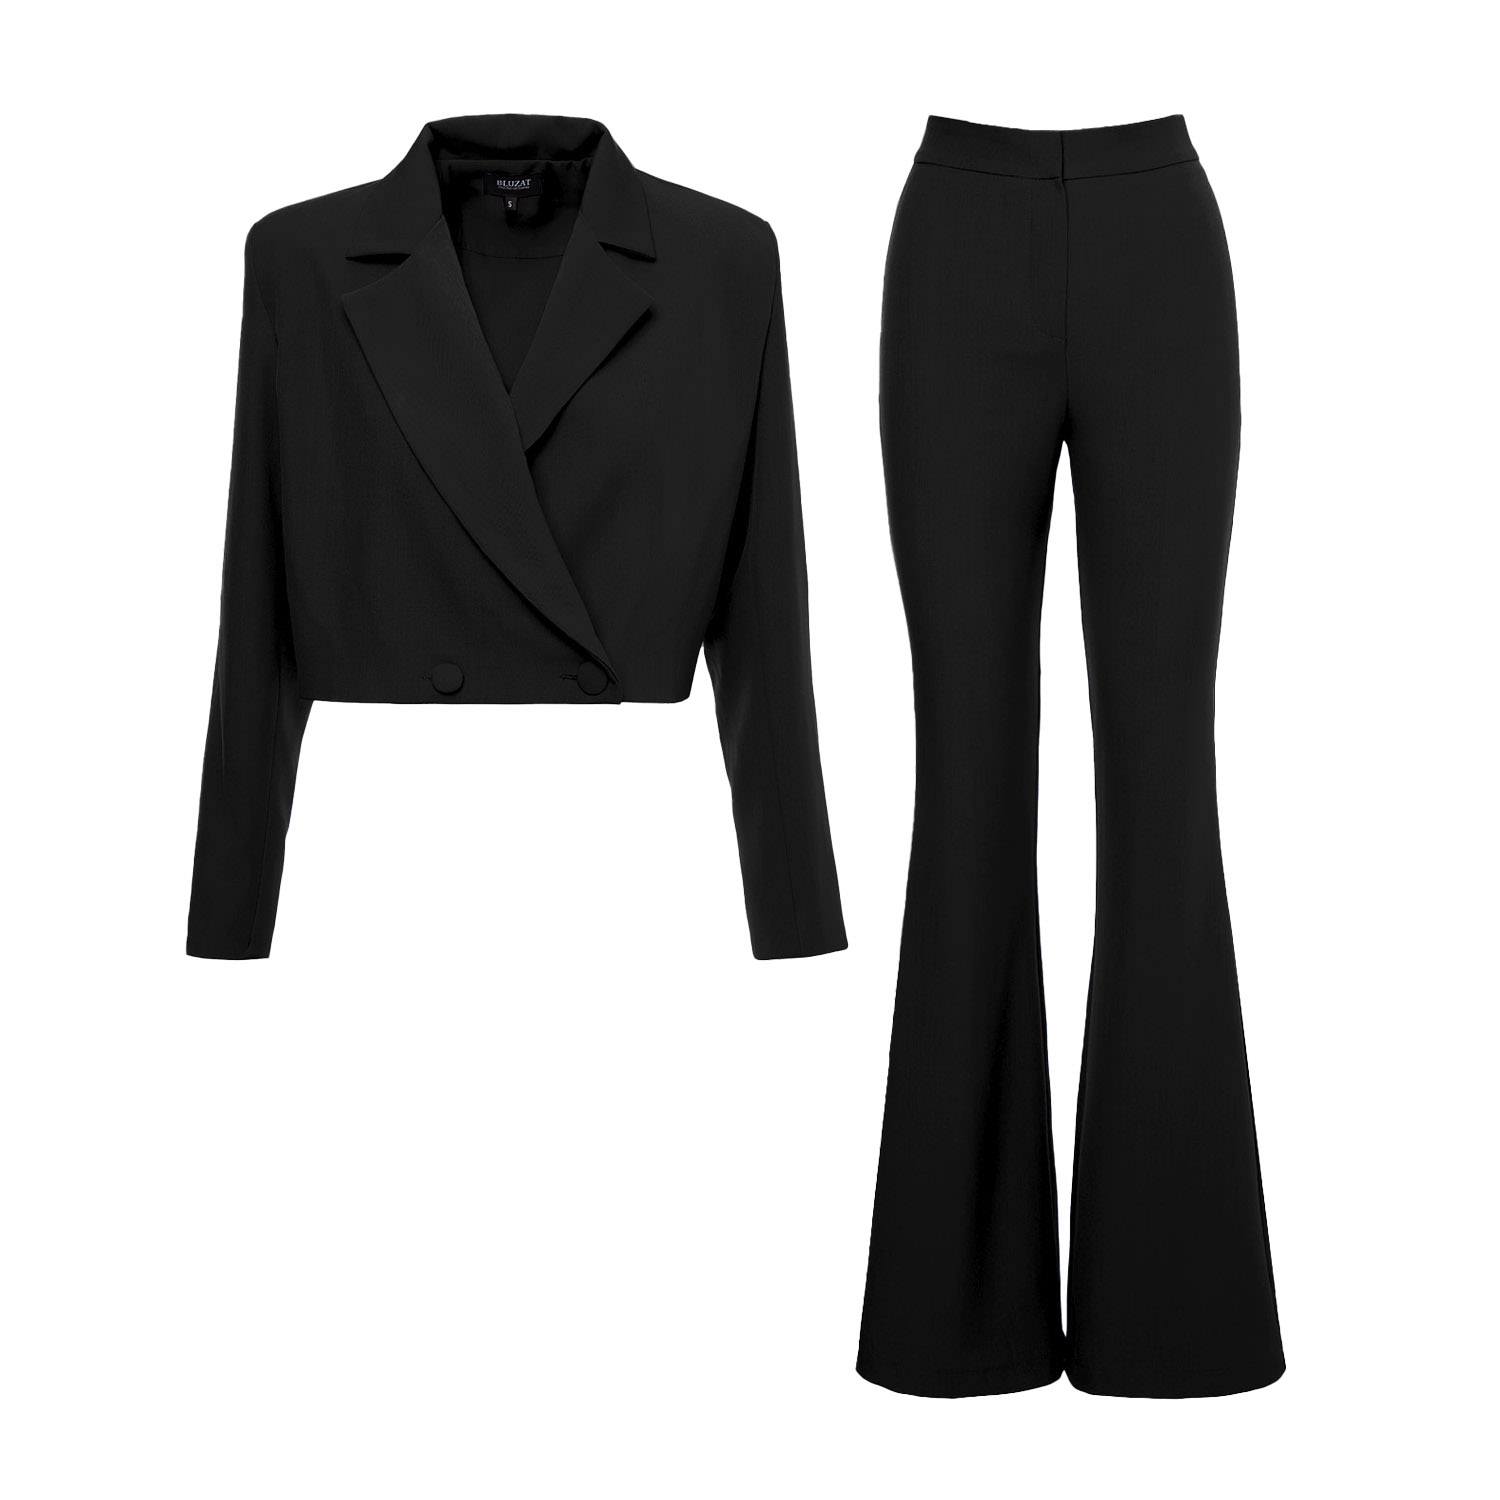 Women’s Black Suit With Cropped Blazer And Flared Trousers Small Bluzat